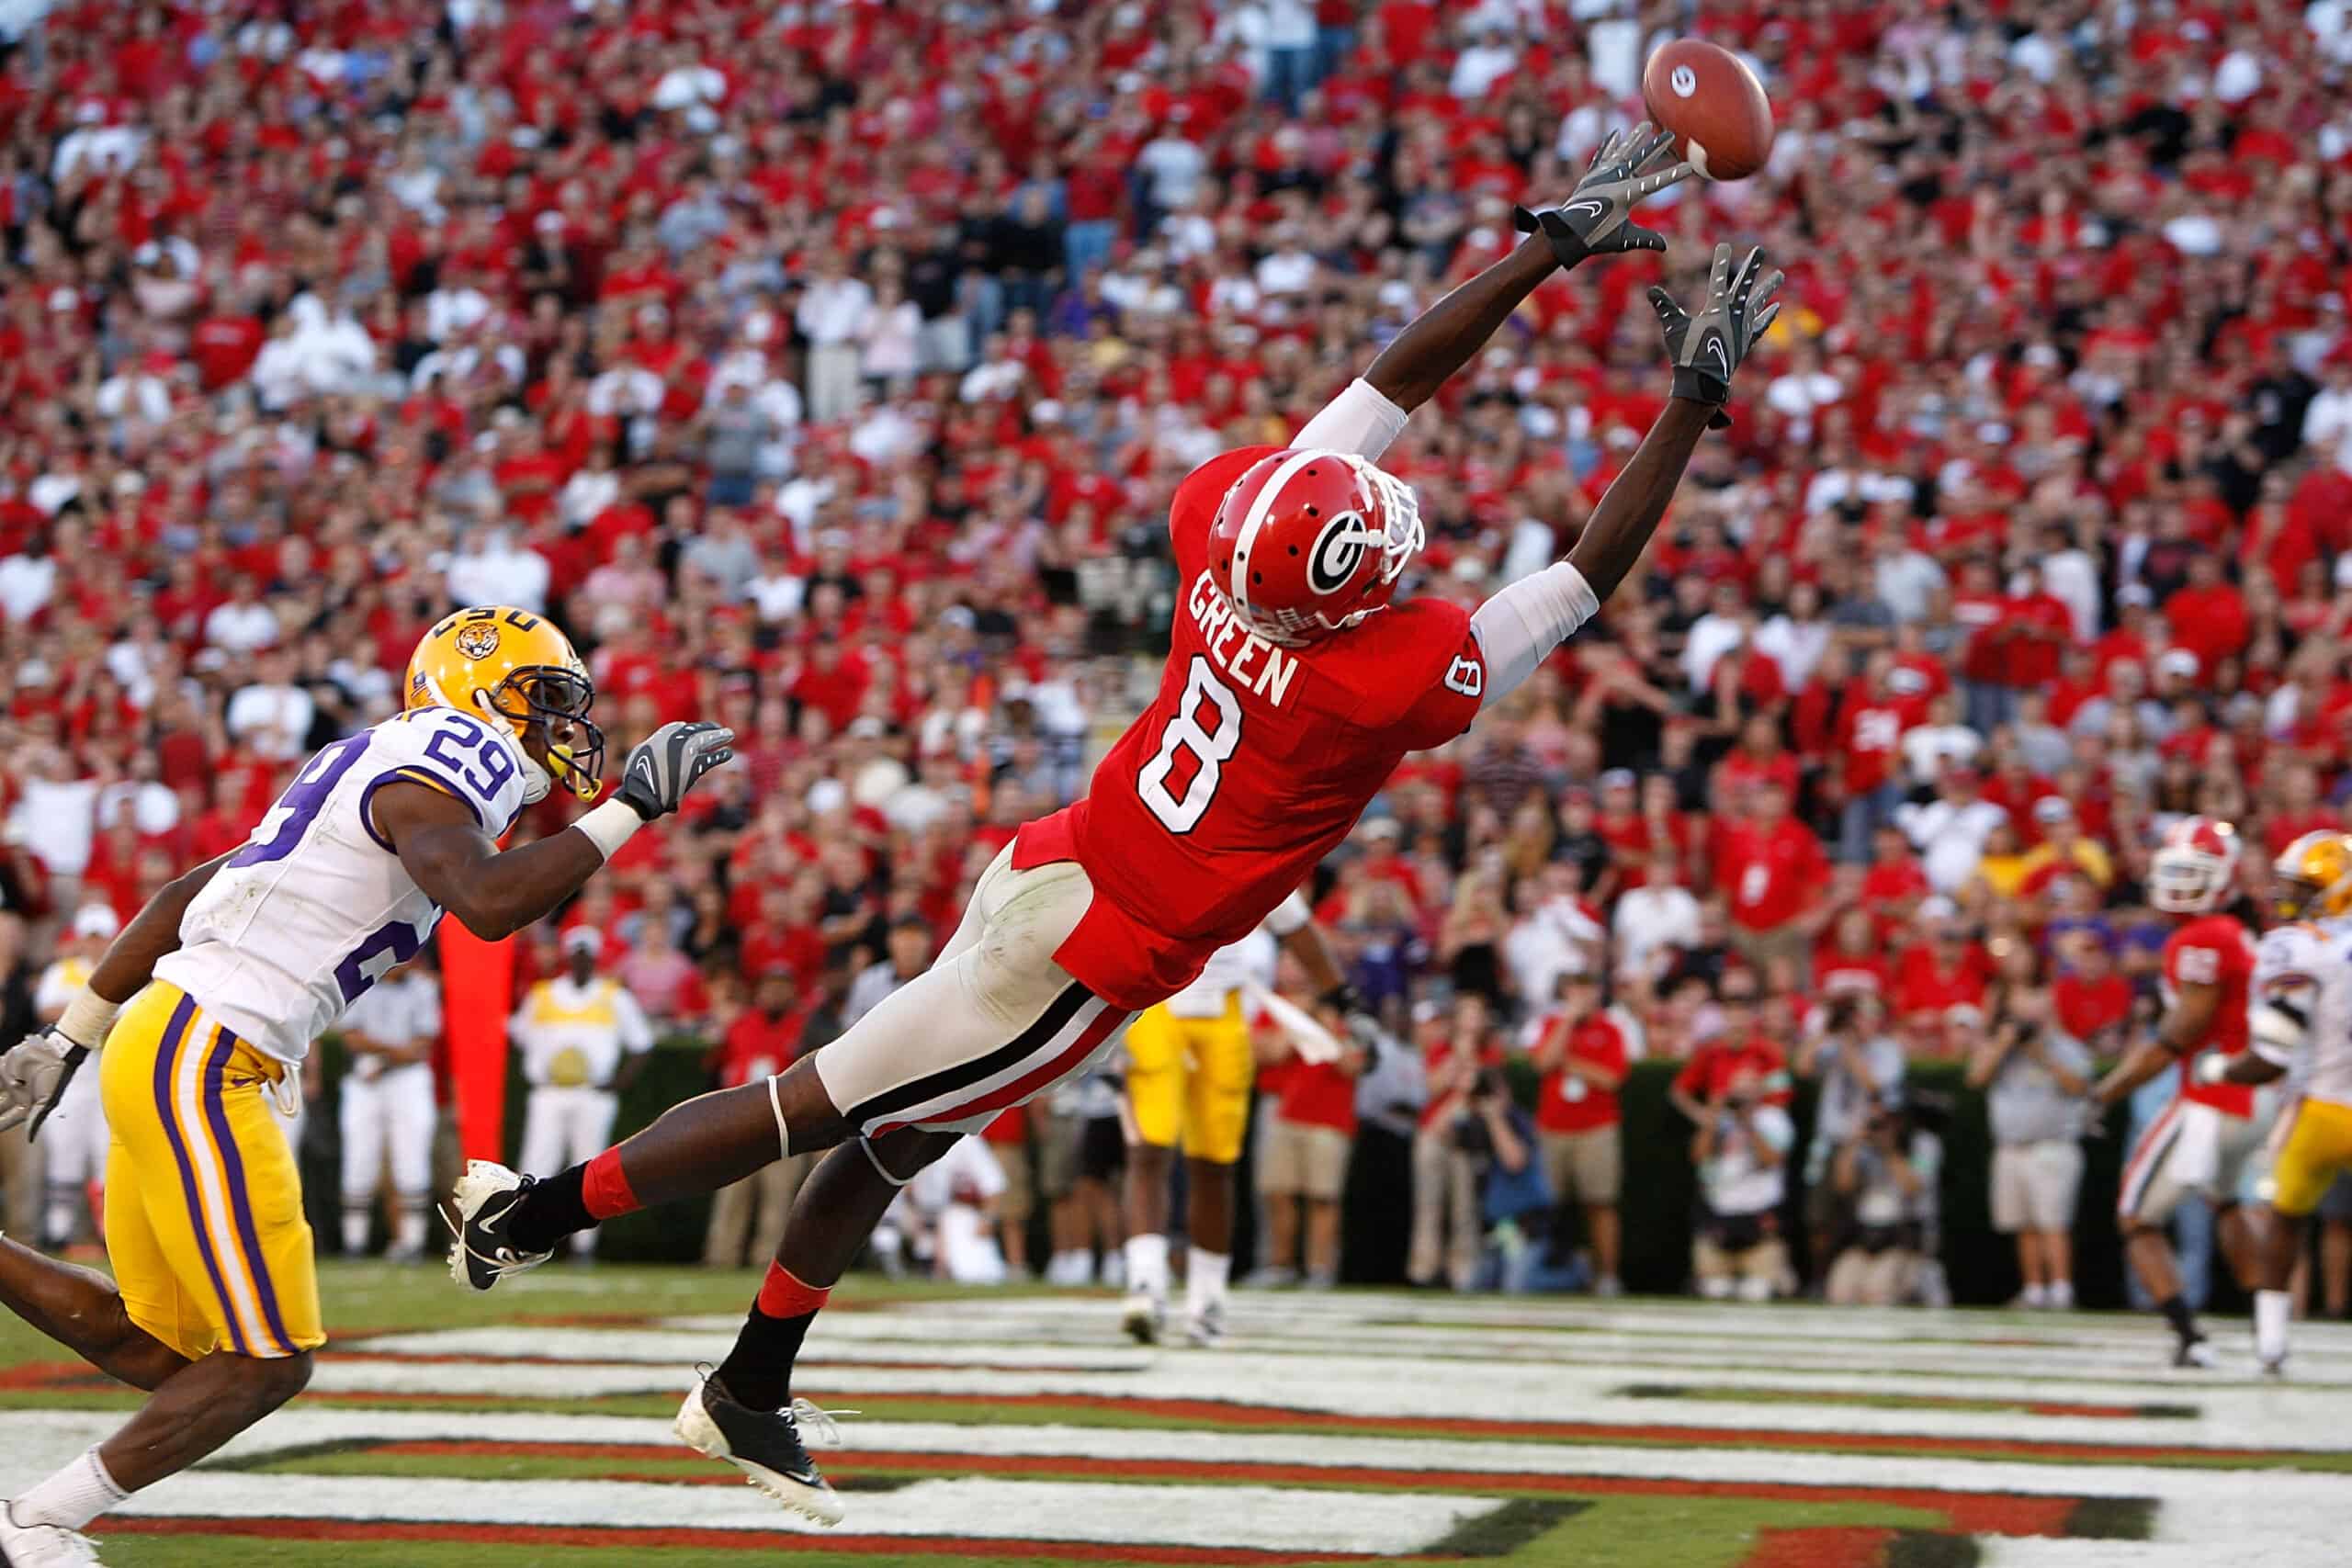 ATHENS, GA - OCTOBER 03: A.J. Green #8 of the Georgia Bulldogs fails to pull in a two-point conversion against Chris Hawkins #29 of the Louisiana State University Tigers at Sanford Stadium on October 3, 2009 in Athens, Georgia. (Photo by Kevin C. Cox/Getty Images)